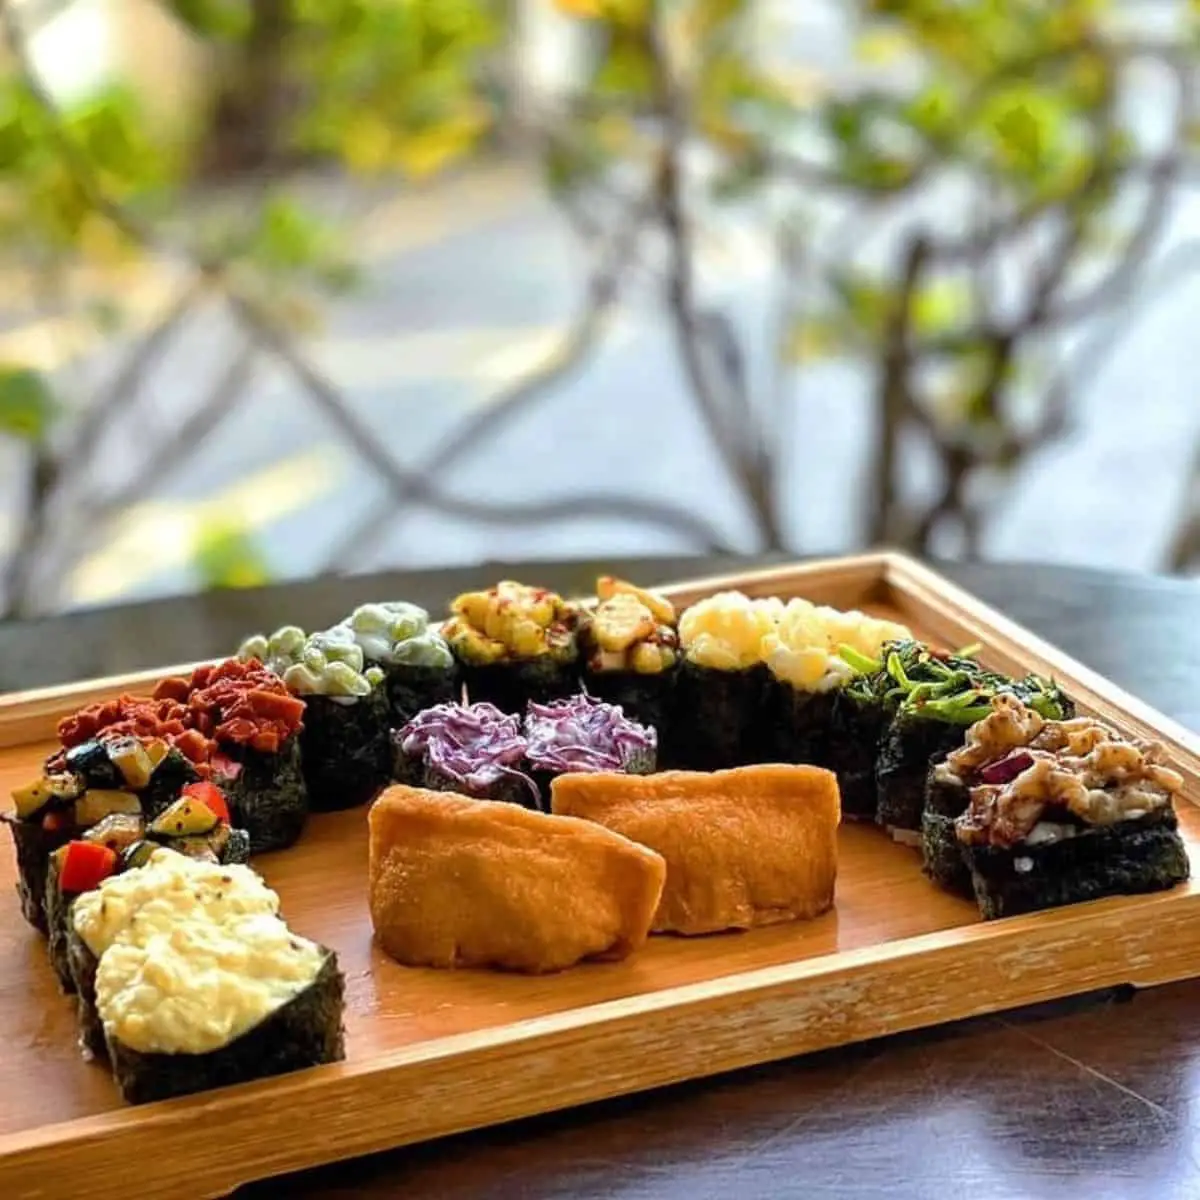 Vegetarian sushi in a wood tray from Vegie Cafe Penang